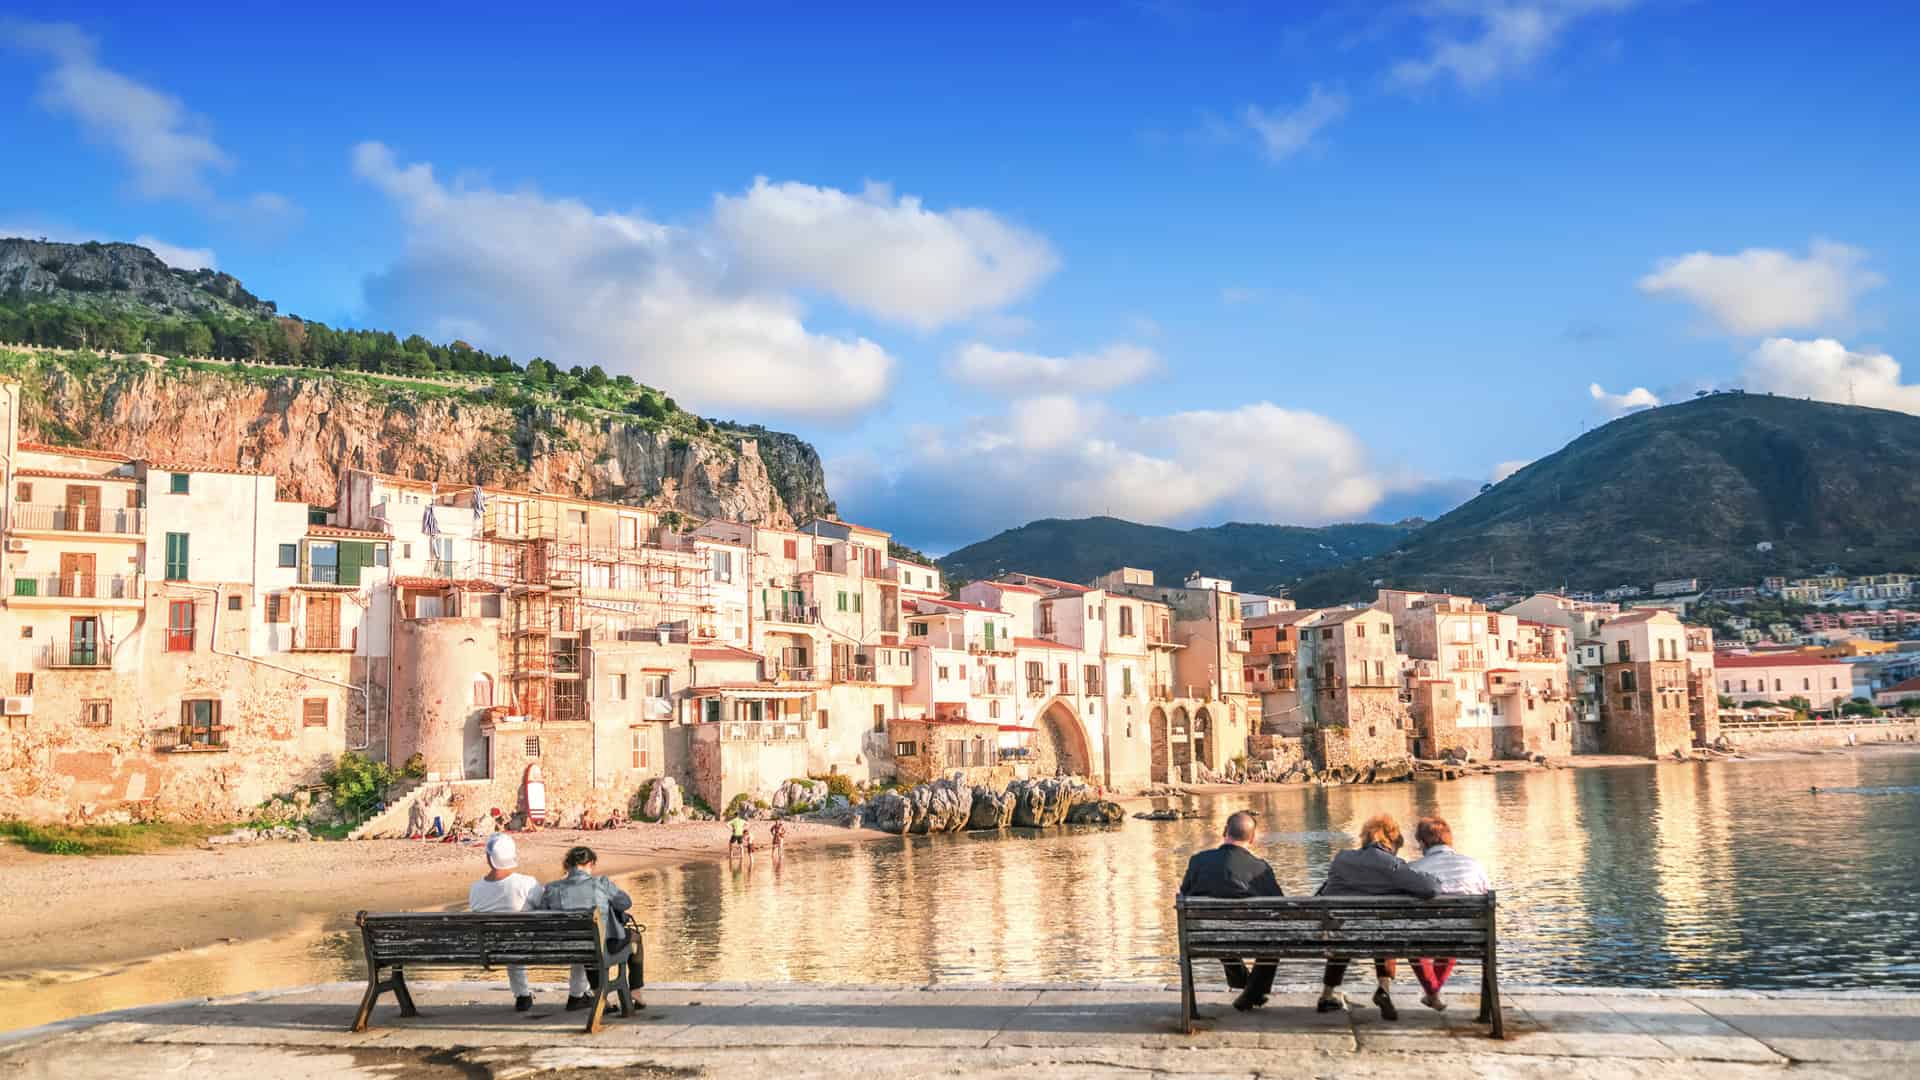 <p>Many great and beautiful Italian coastal towns and small towns inland attract millions of tourists each year. However, if you want to avoid crowds and have more space to get the most out of your trip to the country, you will be interested in the best small towns in Italy.</p> <p>That is what we are going to look at in the following post. With an emphasis, as ever, on frugal vacations and traveling, we will look at the unsung heroes, the towns that do not get the hype or acclaim they should. So, let’s dive right into it with our first of the most underrated towns. </p>